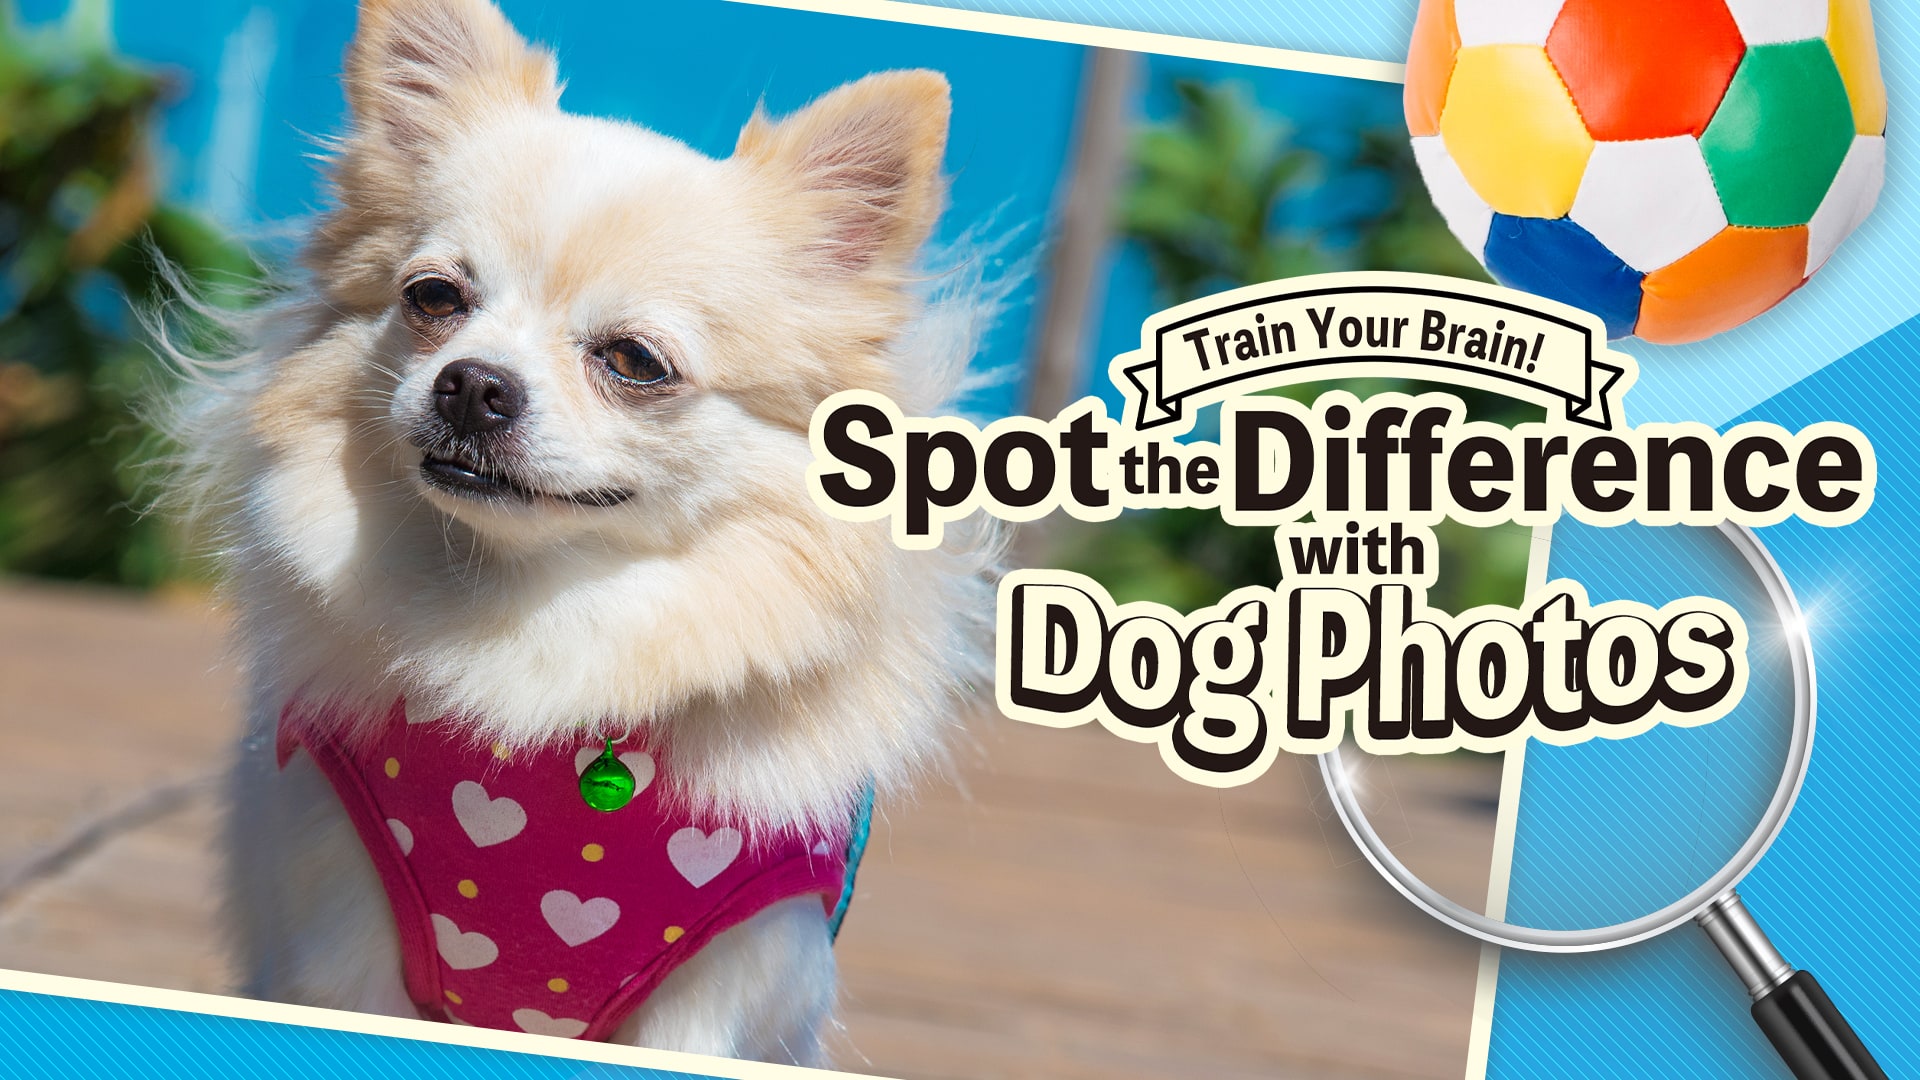 Train Your Brain! Spot the Difference with Dog Photos 1